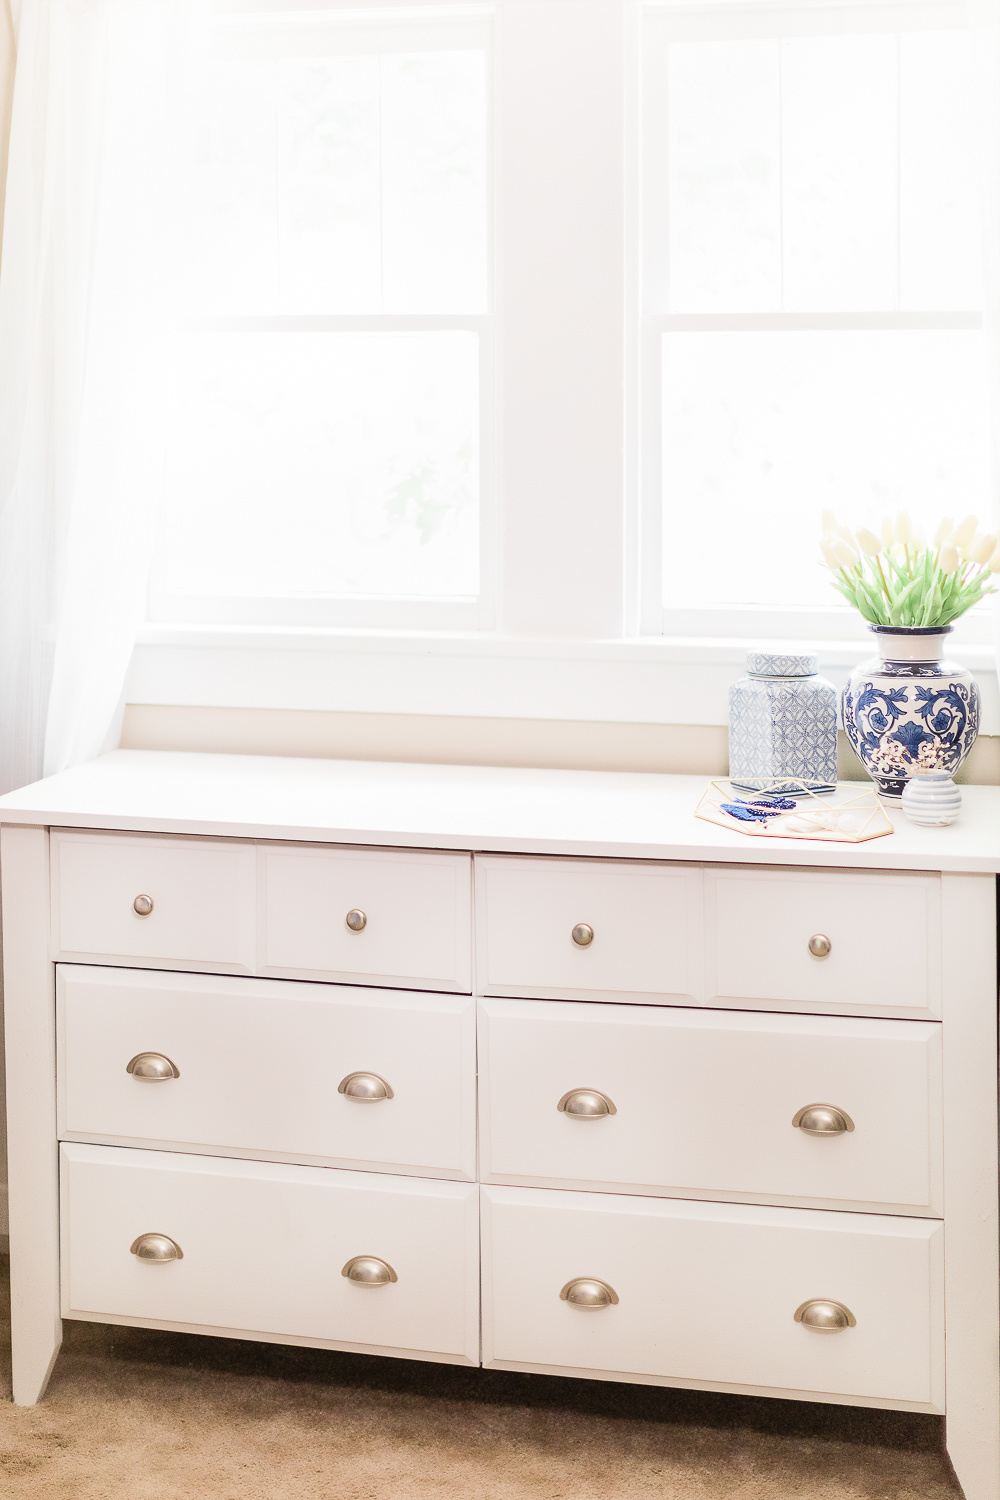 How to Update an Old Dresser with Magnolia Home Acrylic Eggshell Paint by popular DIY blogger Stephanie Ziajka from Diary of a Debutante, Magnolia Home shiplap paint, acrylic eggshell paint for wood, acrylic eggshell paint for furniture, best white paint for dresser, how much paint do I need to paint a dresser